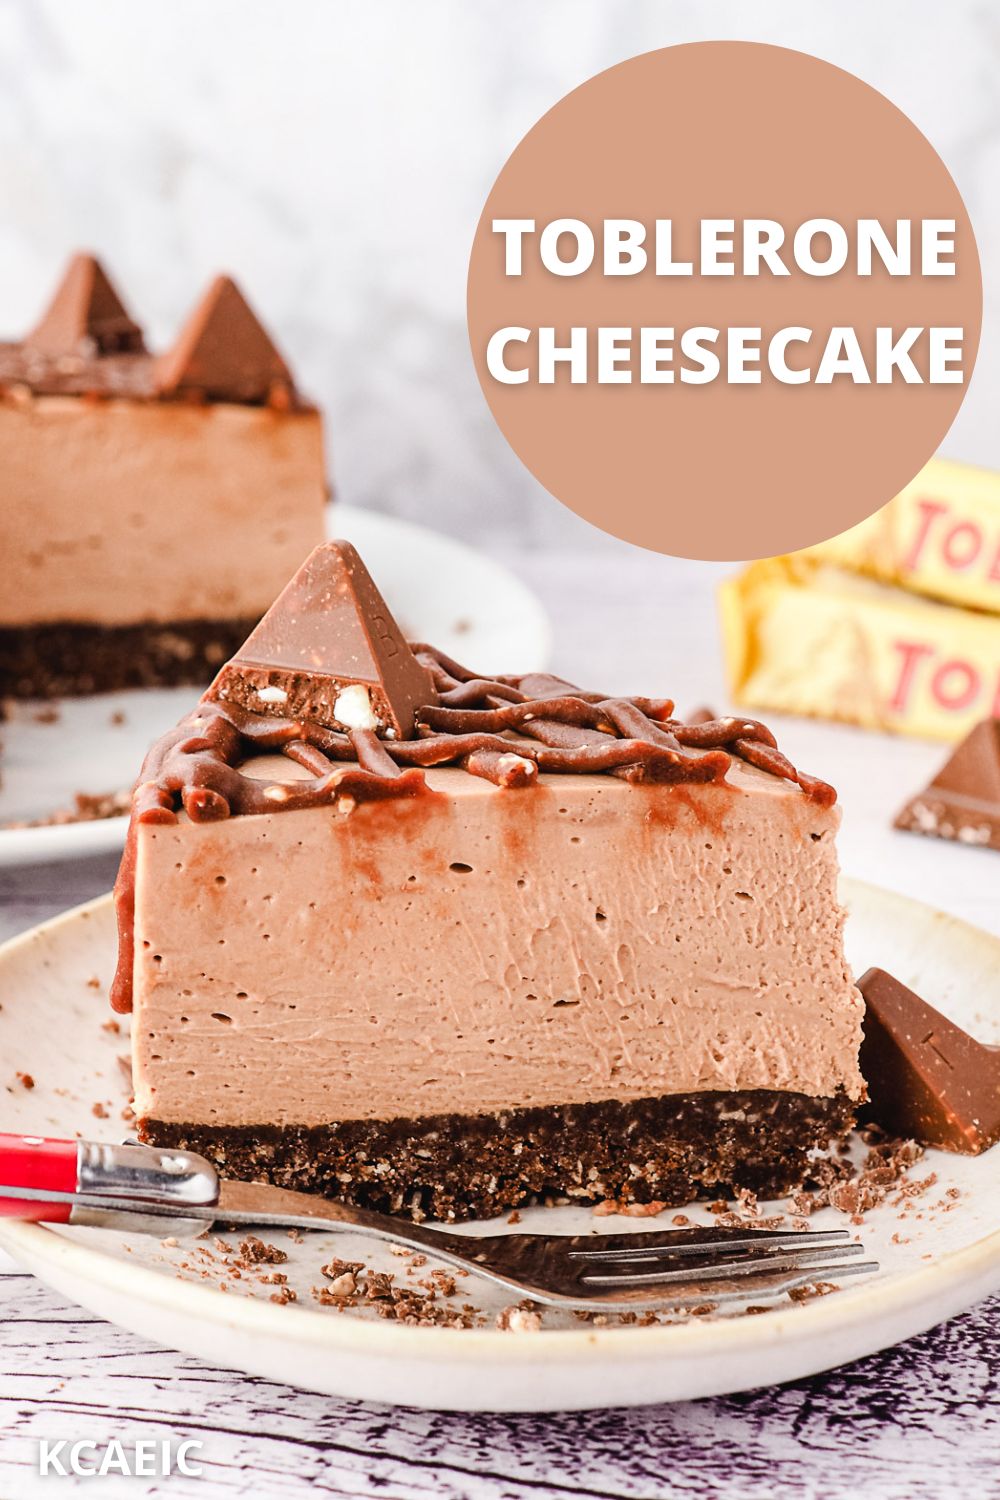 Slice of Toblerone cheesecake on a plate, with rest of cheesecake and more Toblerone in background, with text overlay.